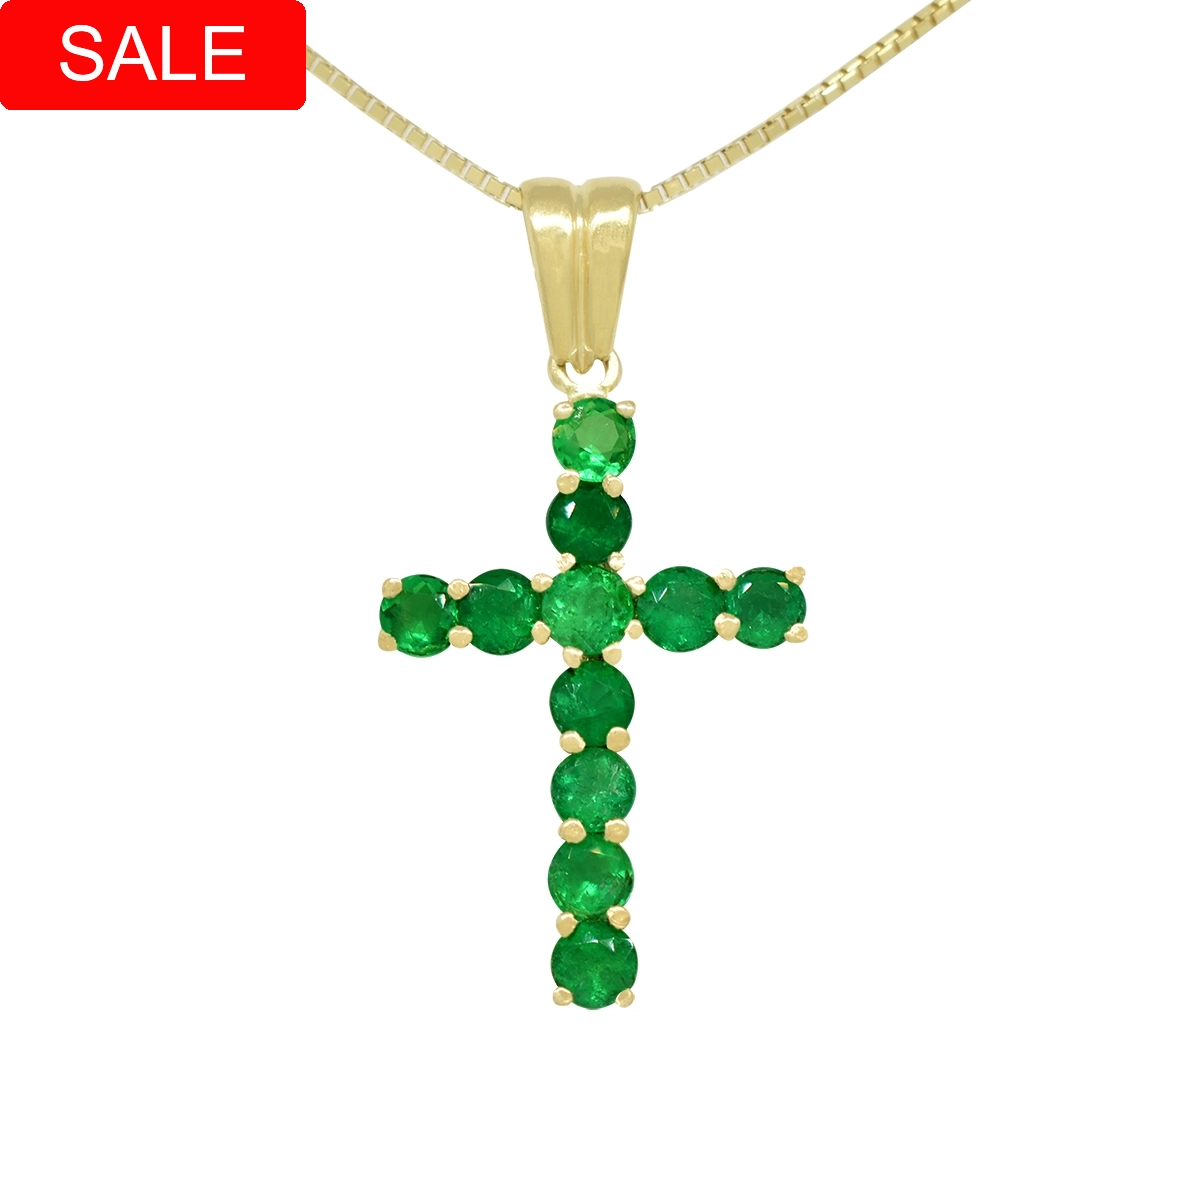 Emerald Cross Pendant in Solid 18K Yellow Gold With 11 Natural Emeralds